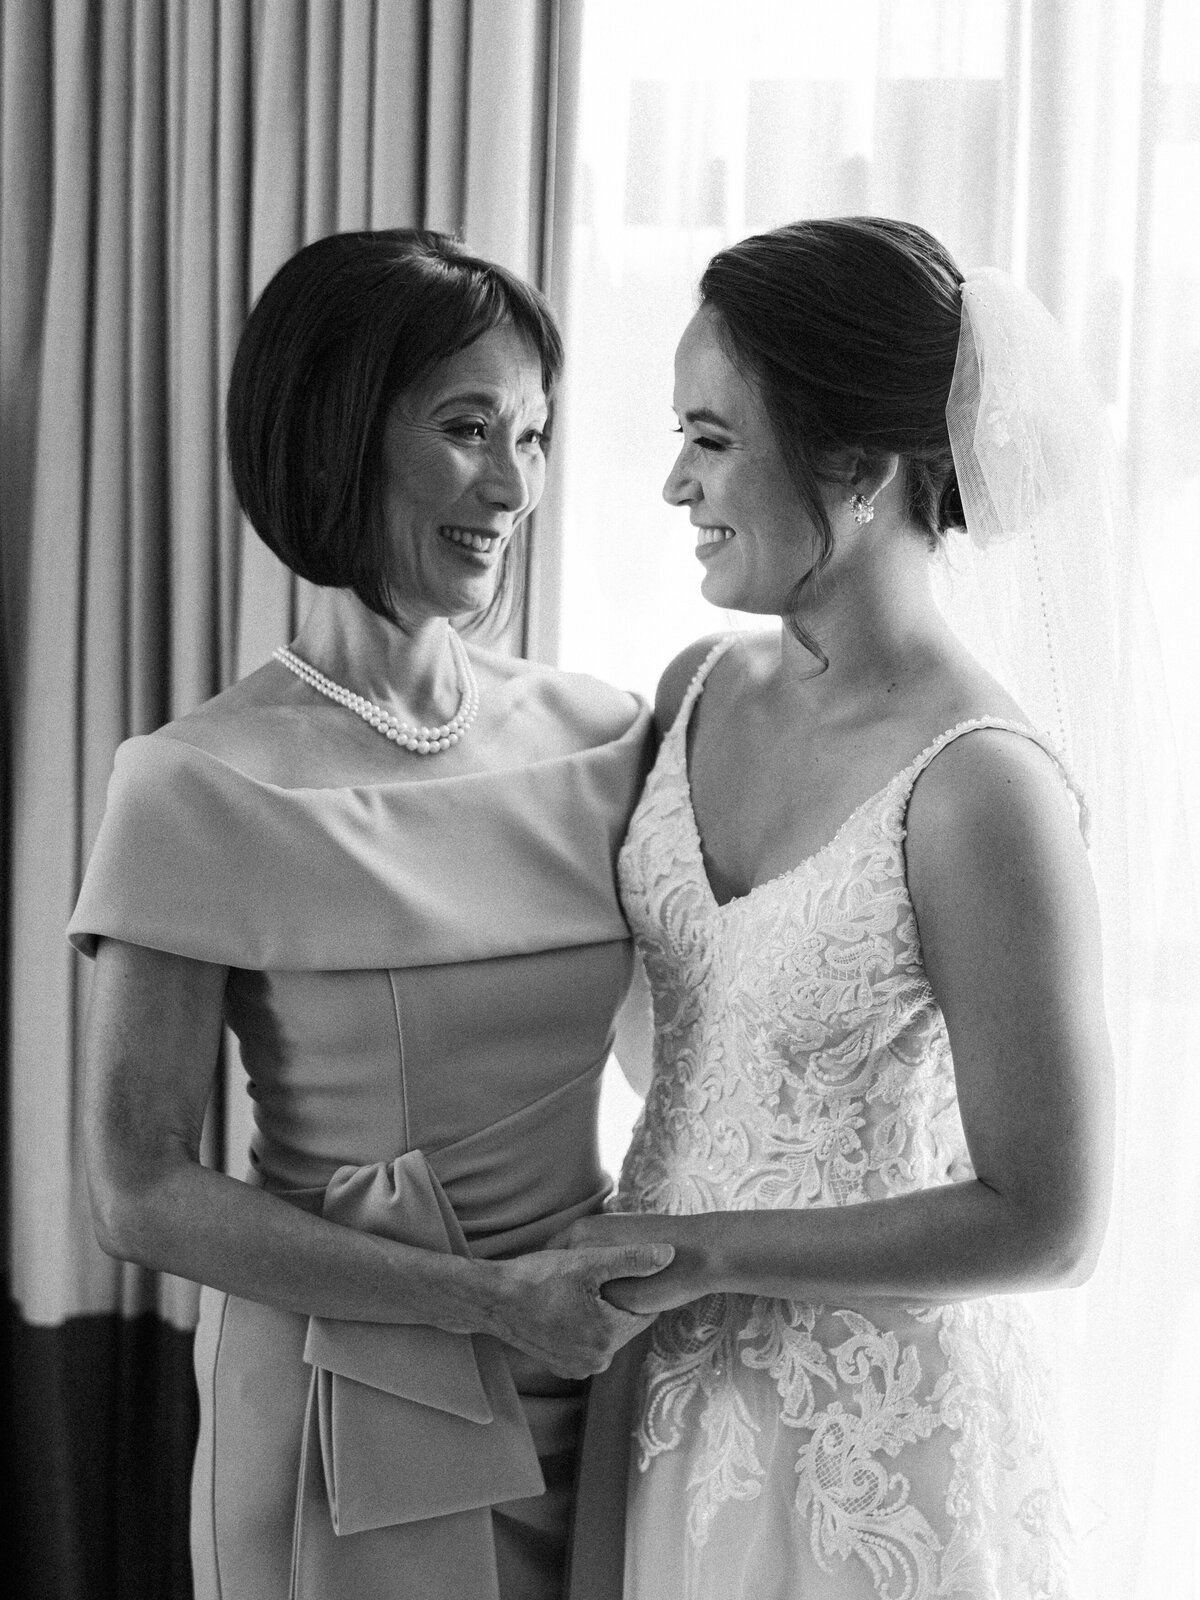 A bride and her mom share a touching moment while the bride gets ready for her wedding